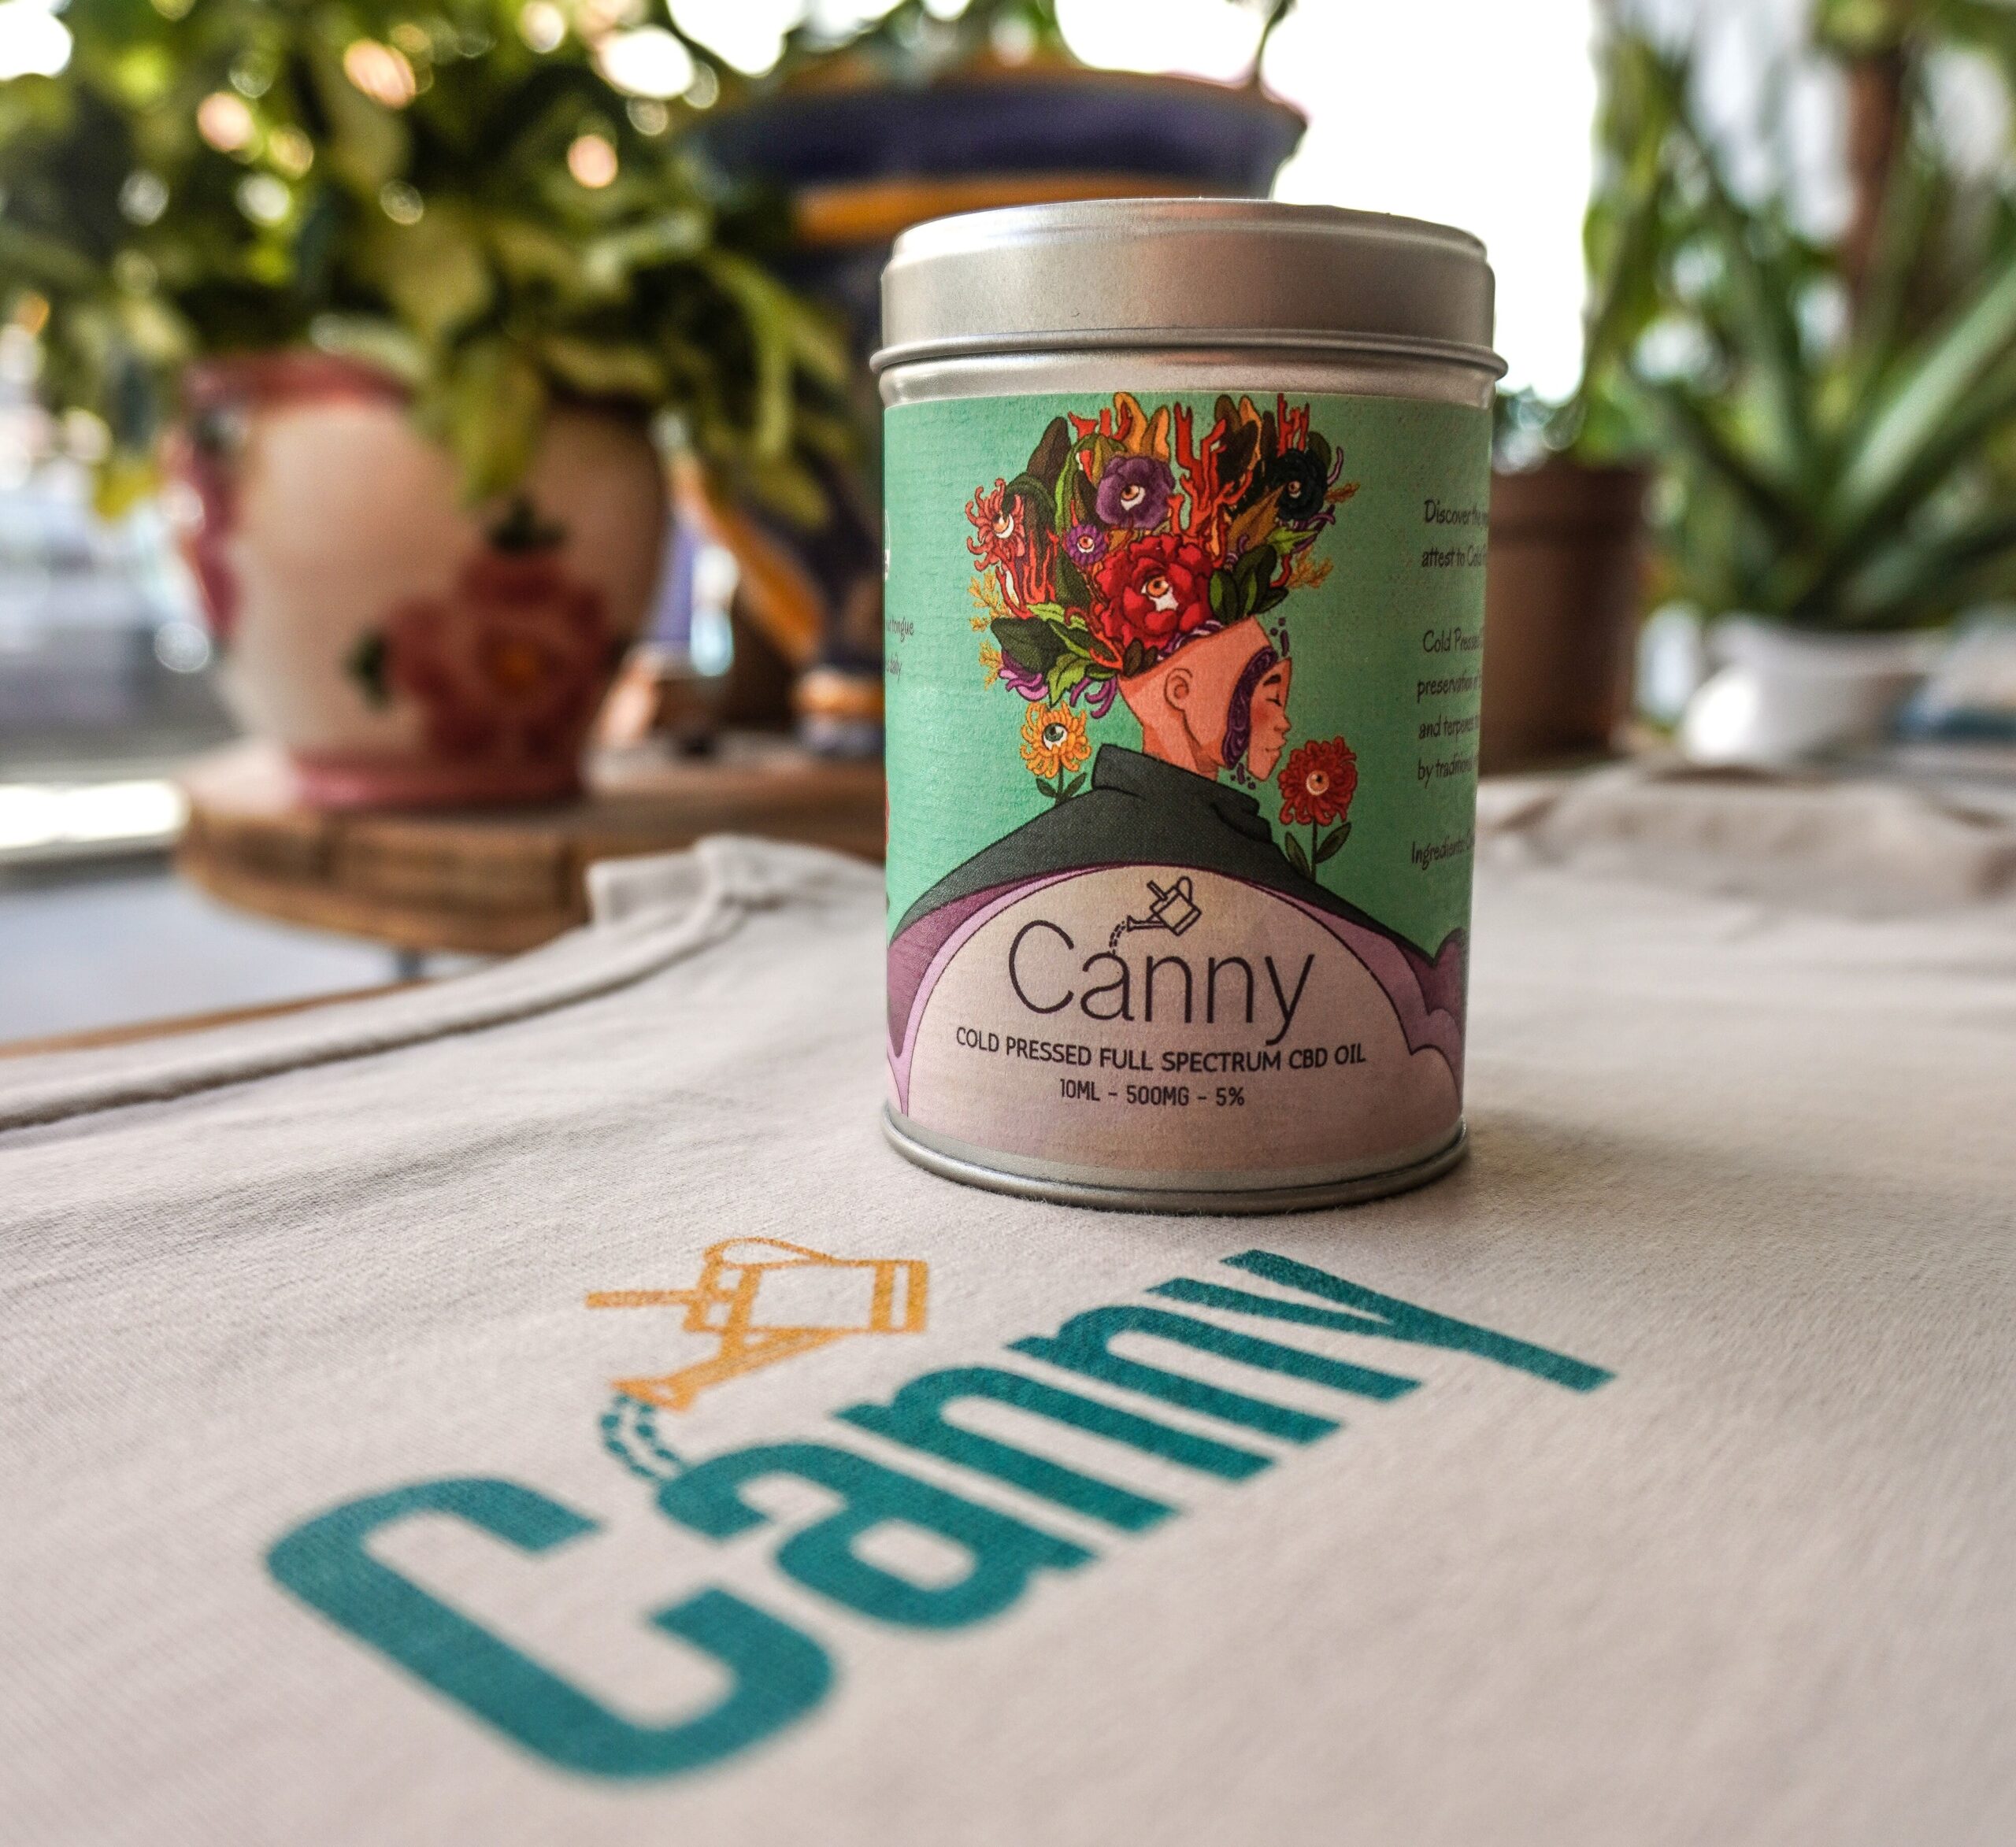 Discover the Finest Organic Cold Pressed CBD Oil Crafted by hand from an Organic Certified Hemp farm here in the UK. Uncompromising quality and organic ingredients, experience the anxiety busting difference with CannyShop Now